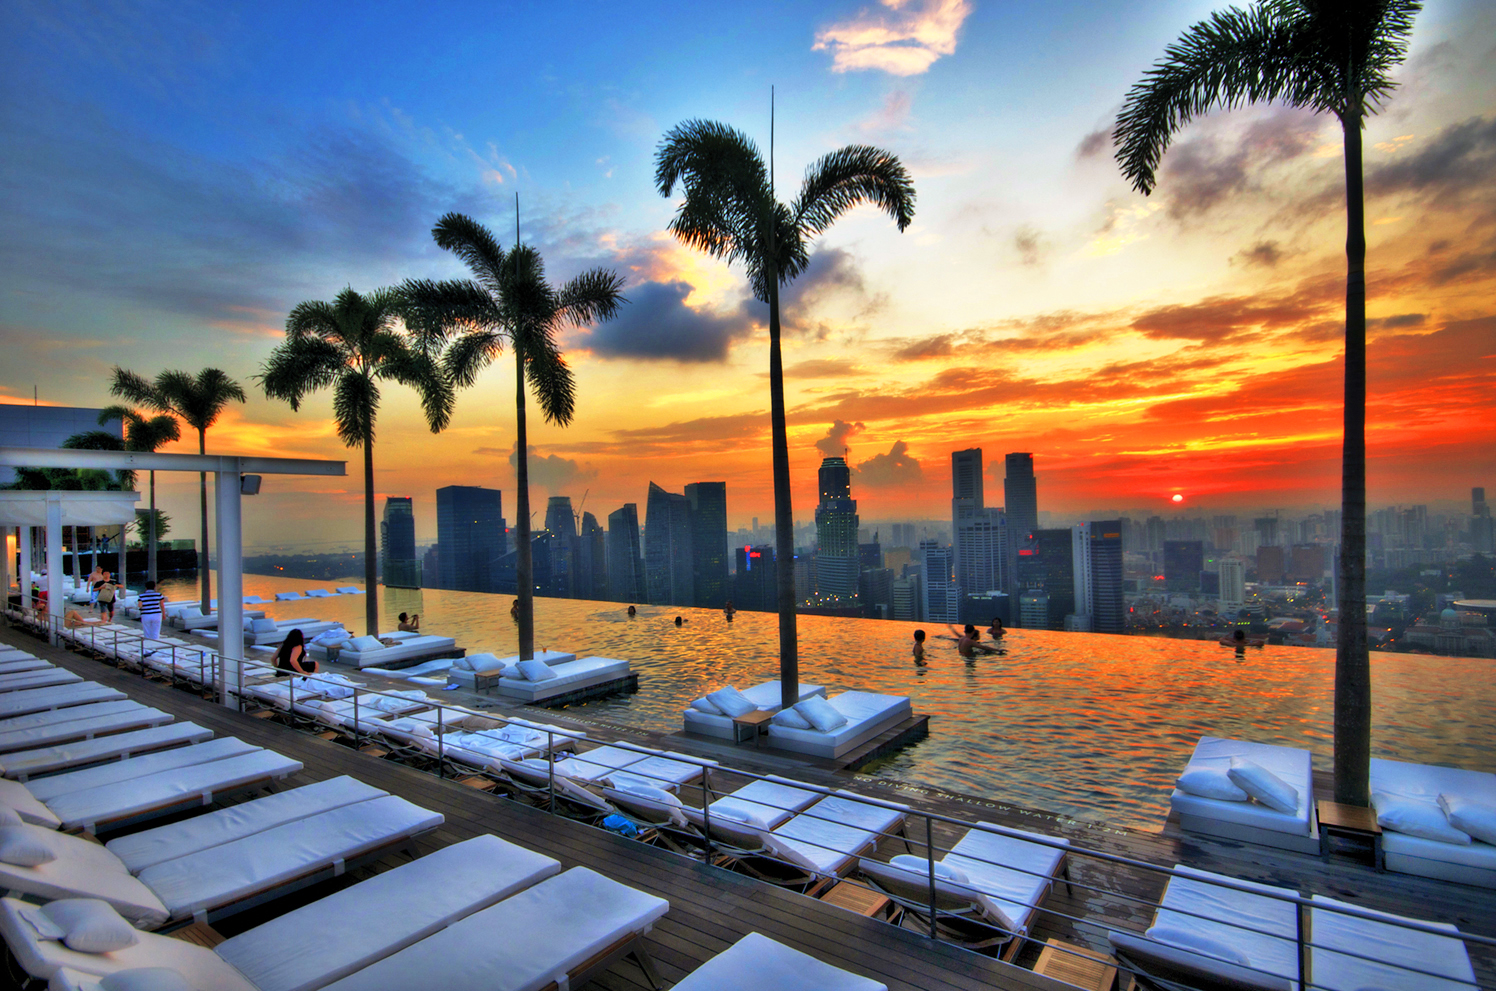 Swimming Pool Marina Sands Bay Things to Do In Singapore